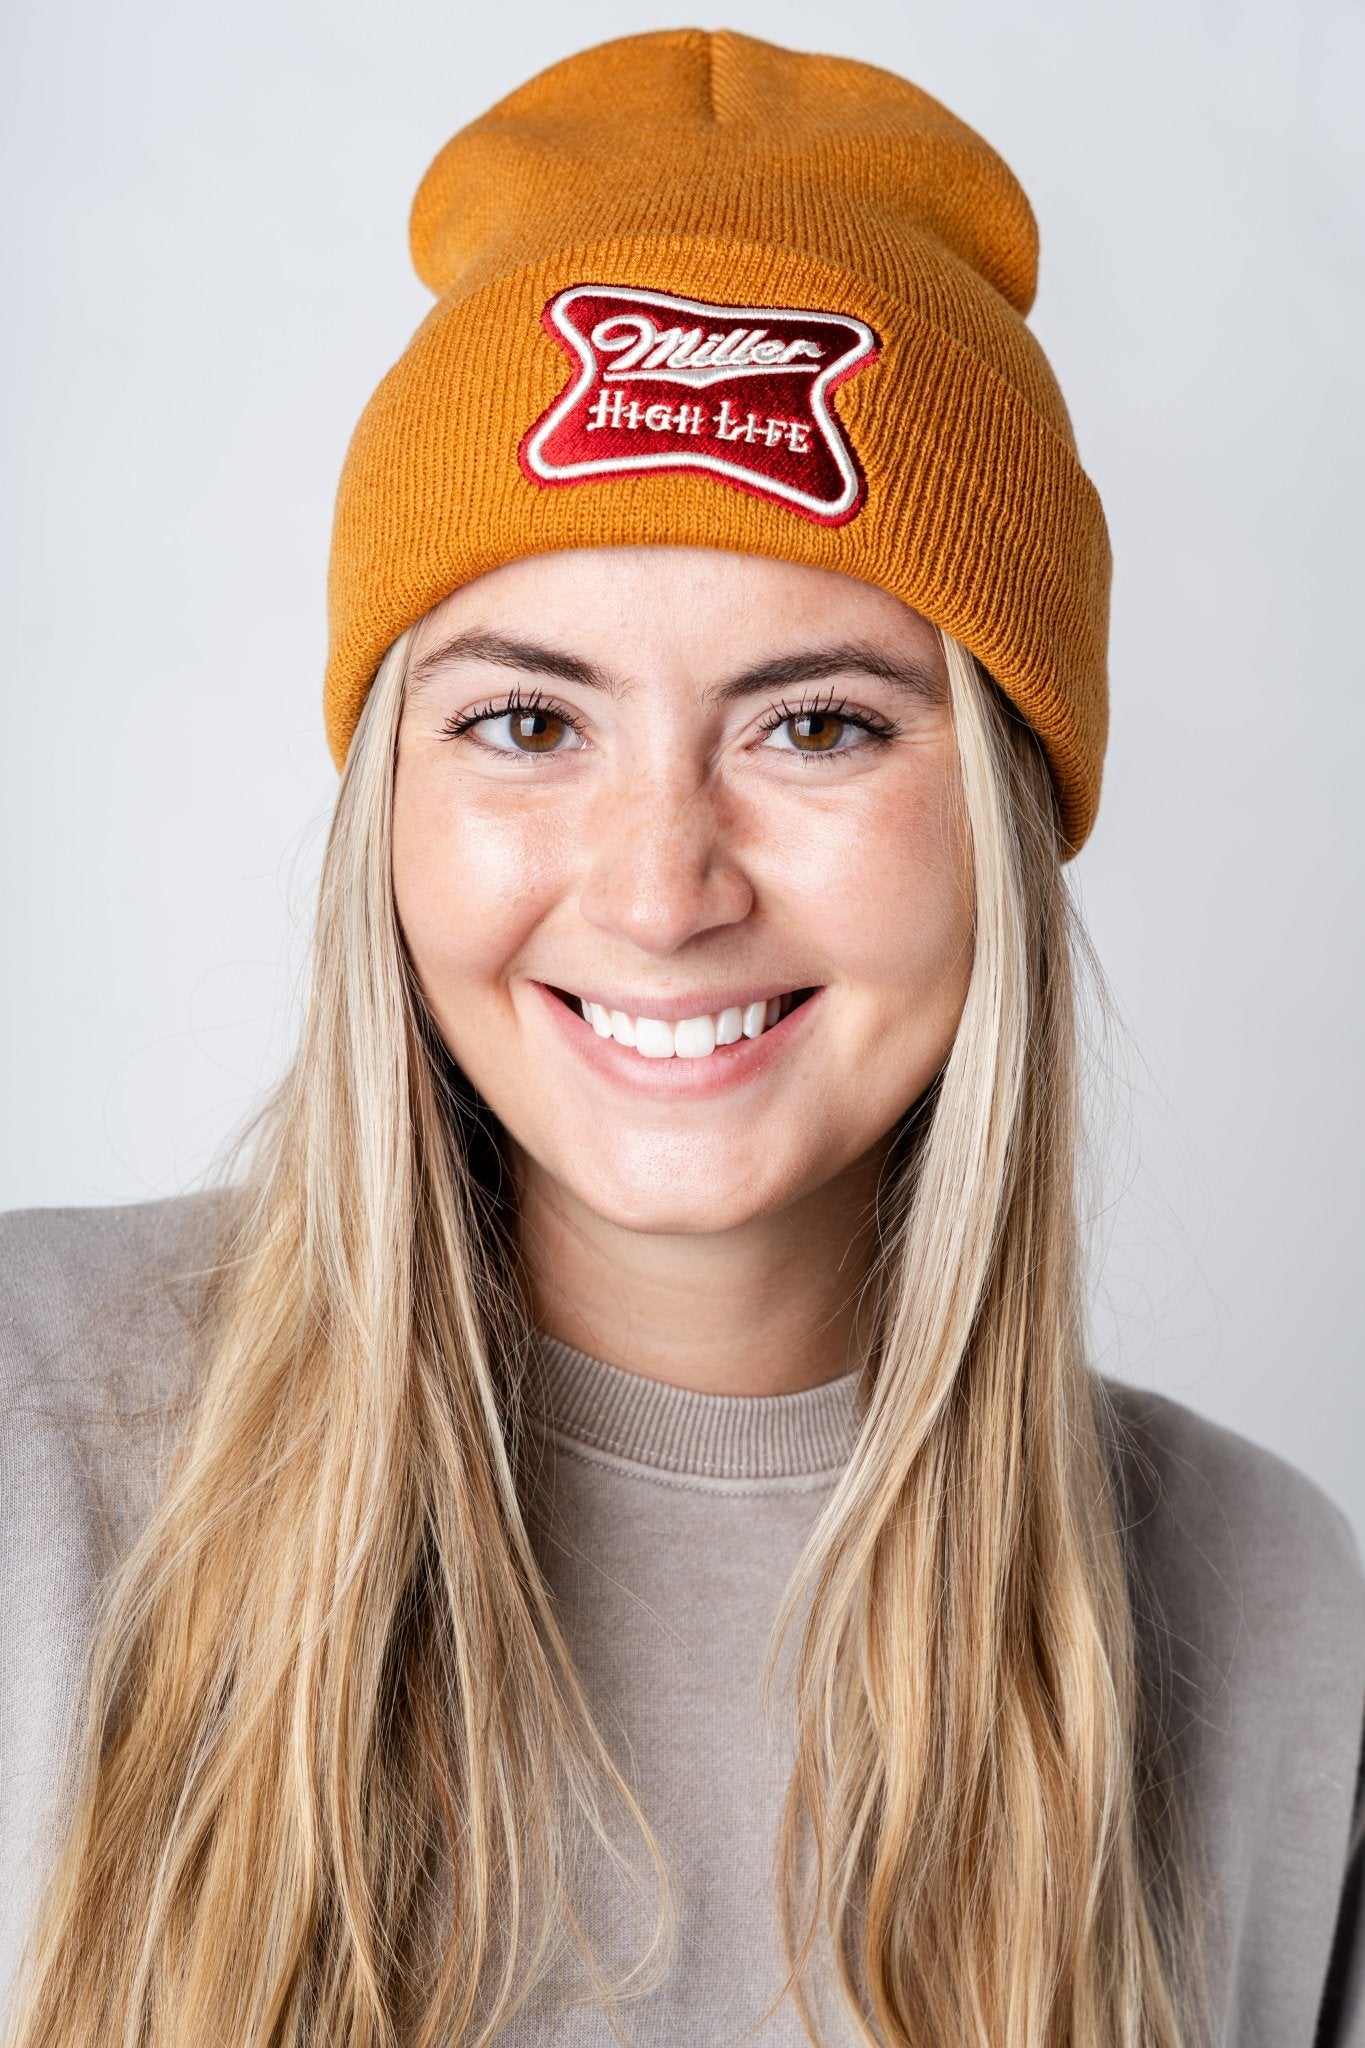 Miller high life cuffed knit beanie hazel - Trendy Gifts at Lush Fashion Lounge Boutique in Oklahoma City